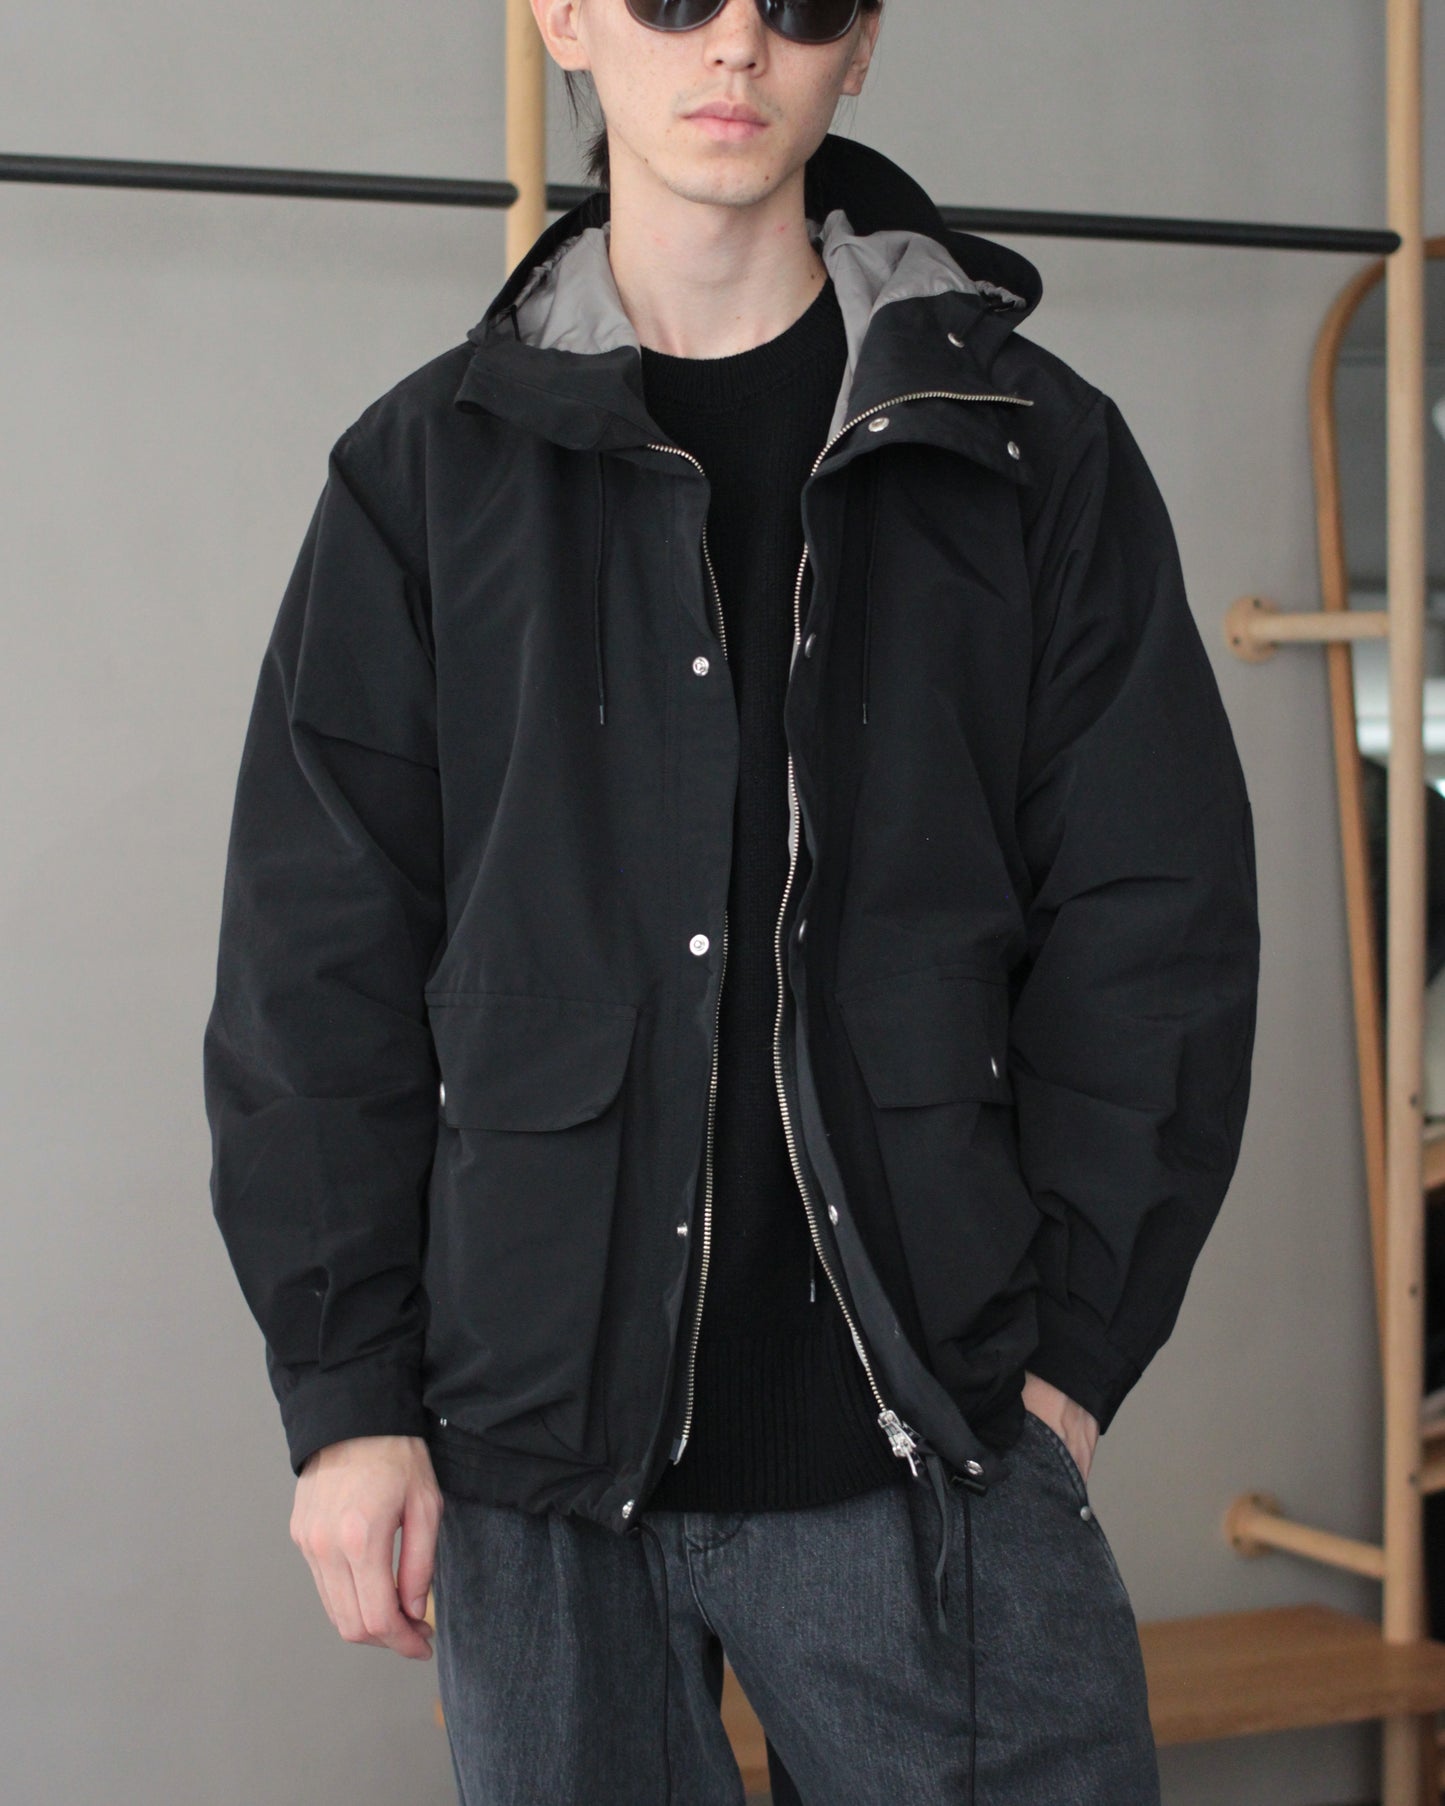 ENDS and MEANS/Sanpo Jacket "Black"